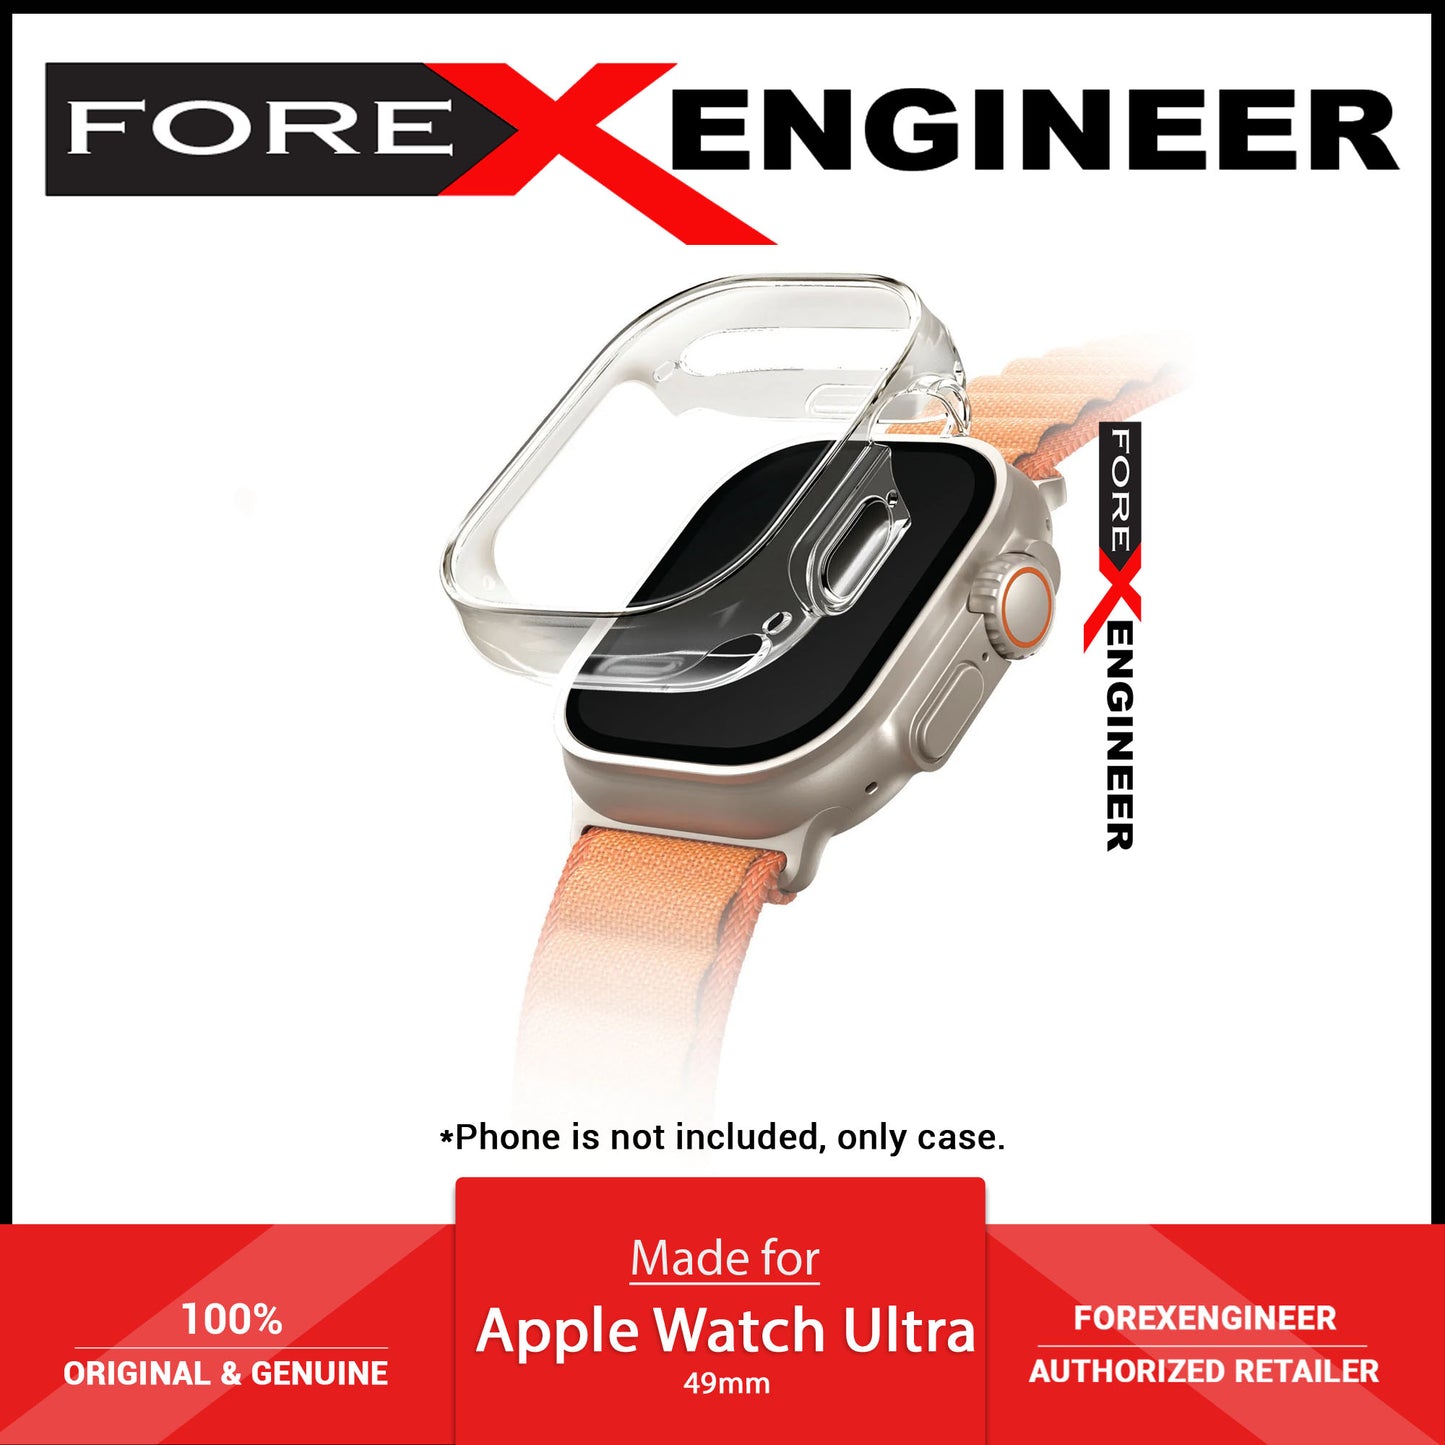 UNIQ Garde Case for Apple Watch Ultra 49mm with build in screen protection - Dove (Clear) (Barcode: 8886463683989 )